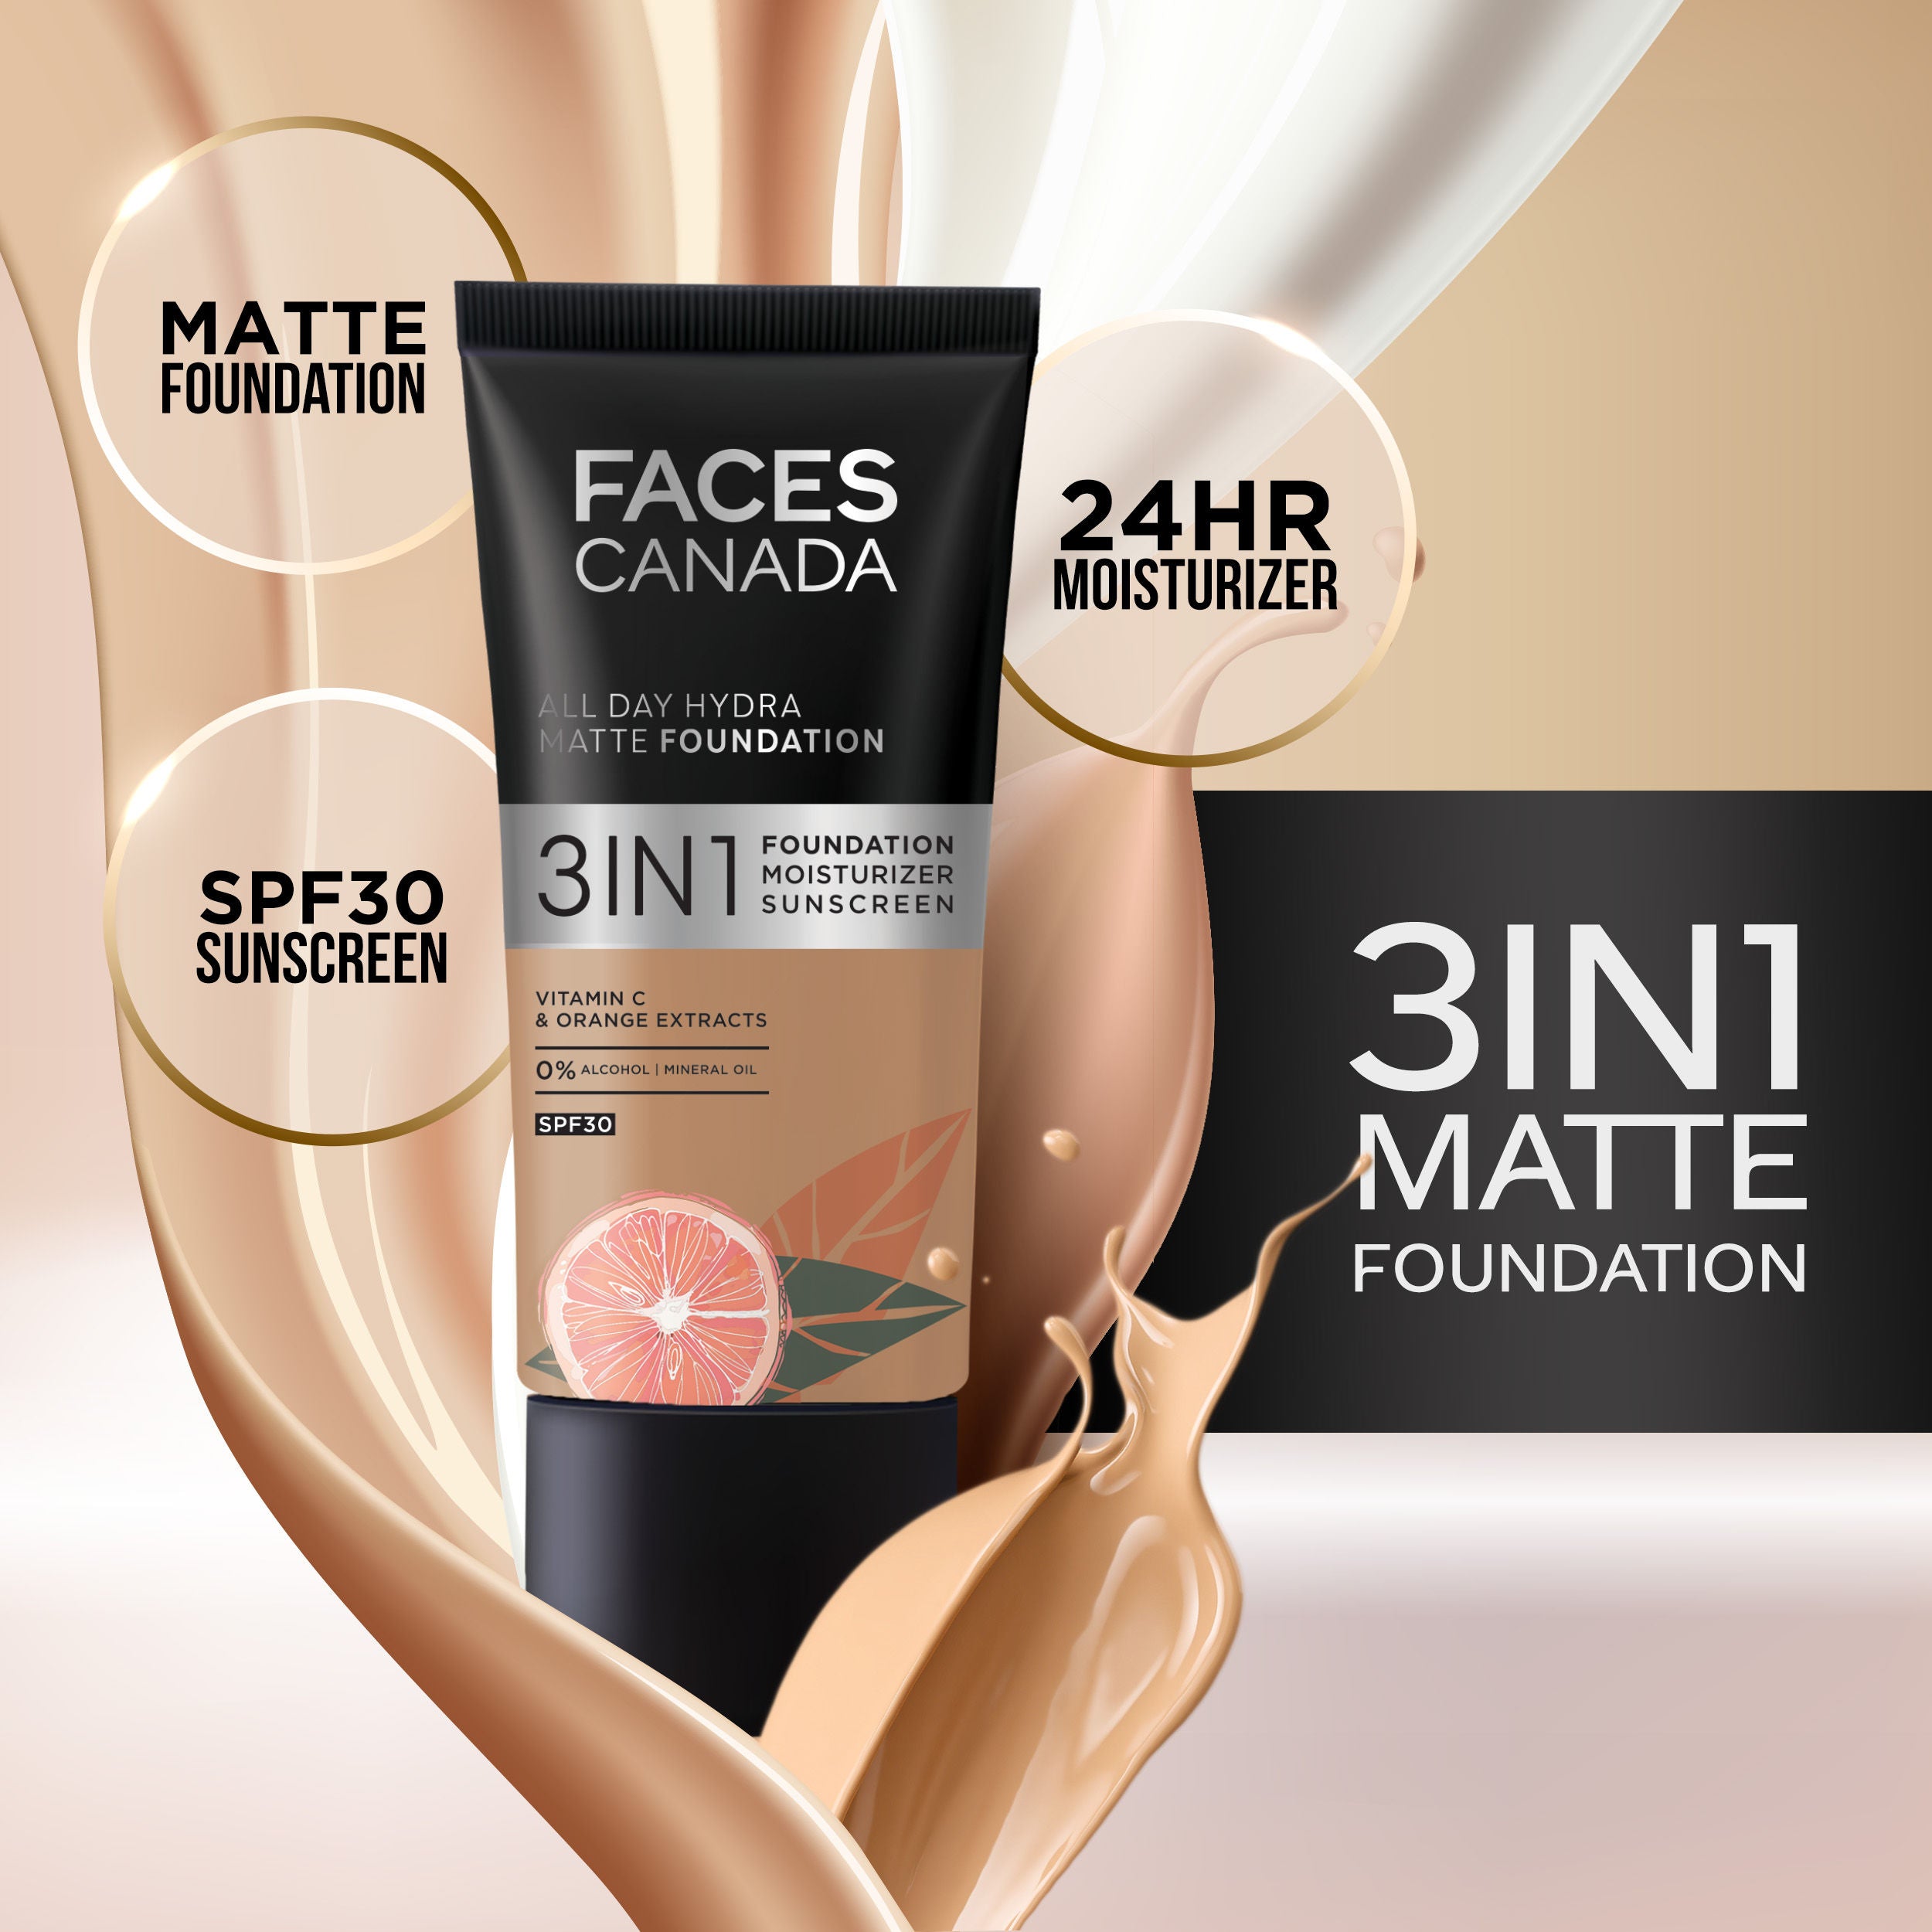 Faces Canada 3 In 1 All Day Hydra Matte Foundation - Absolute Ivory 012 (25ml) Faces Canada